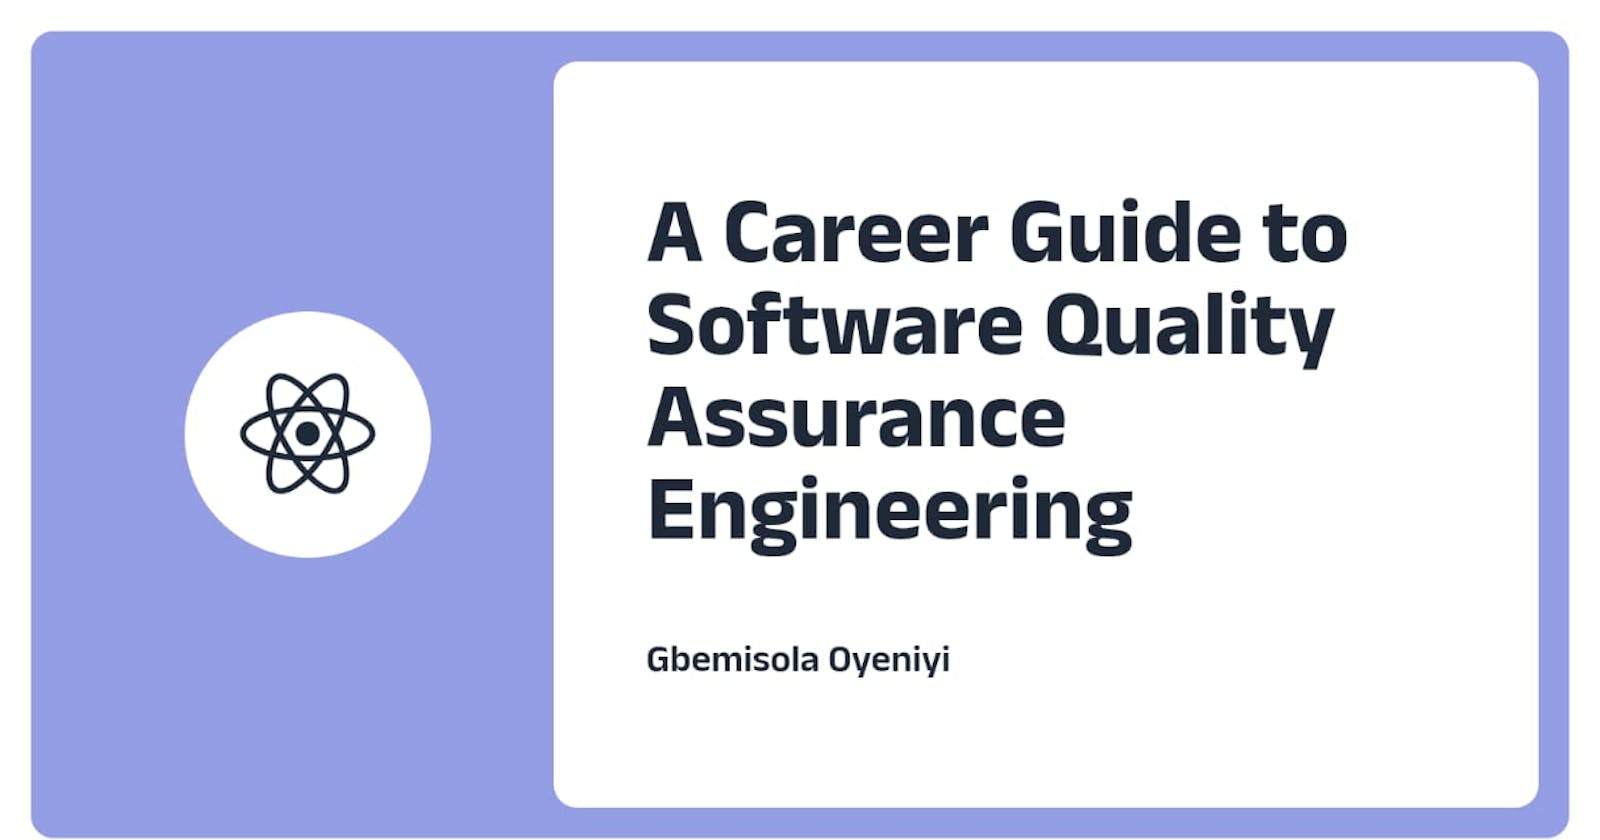 A Career Guide to Software Quality Assurance Engineering (including FAQs)